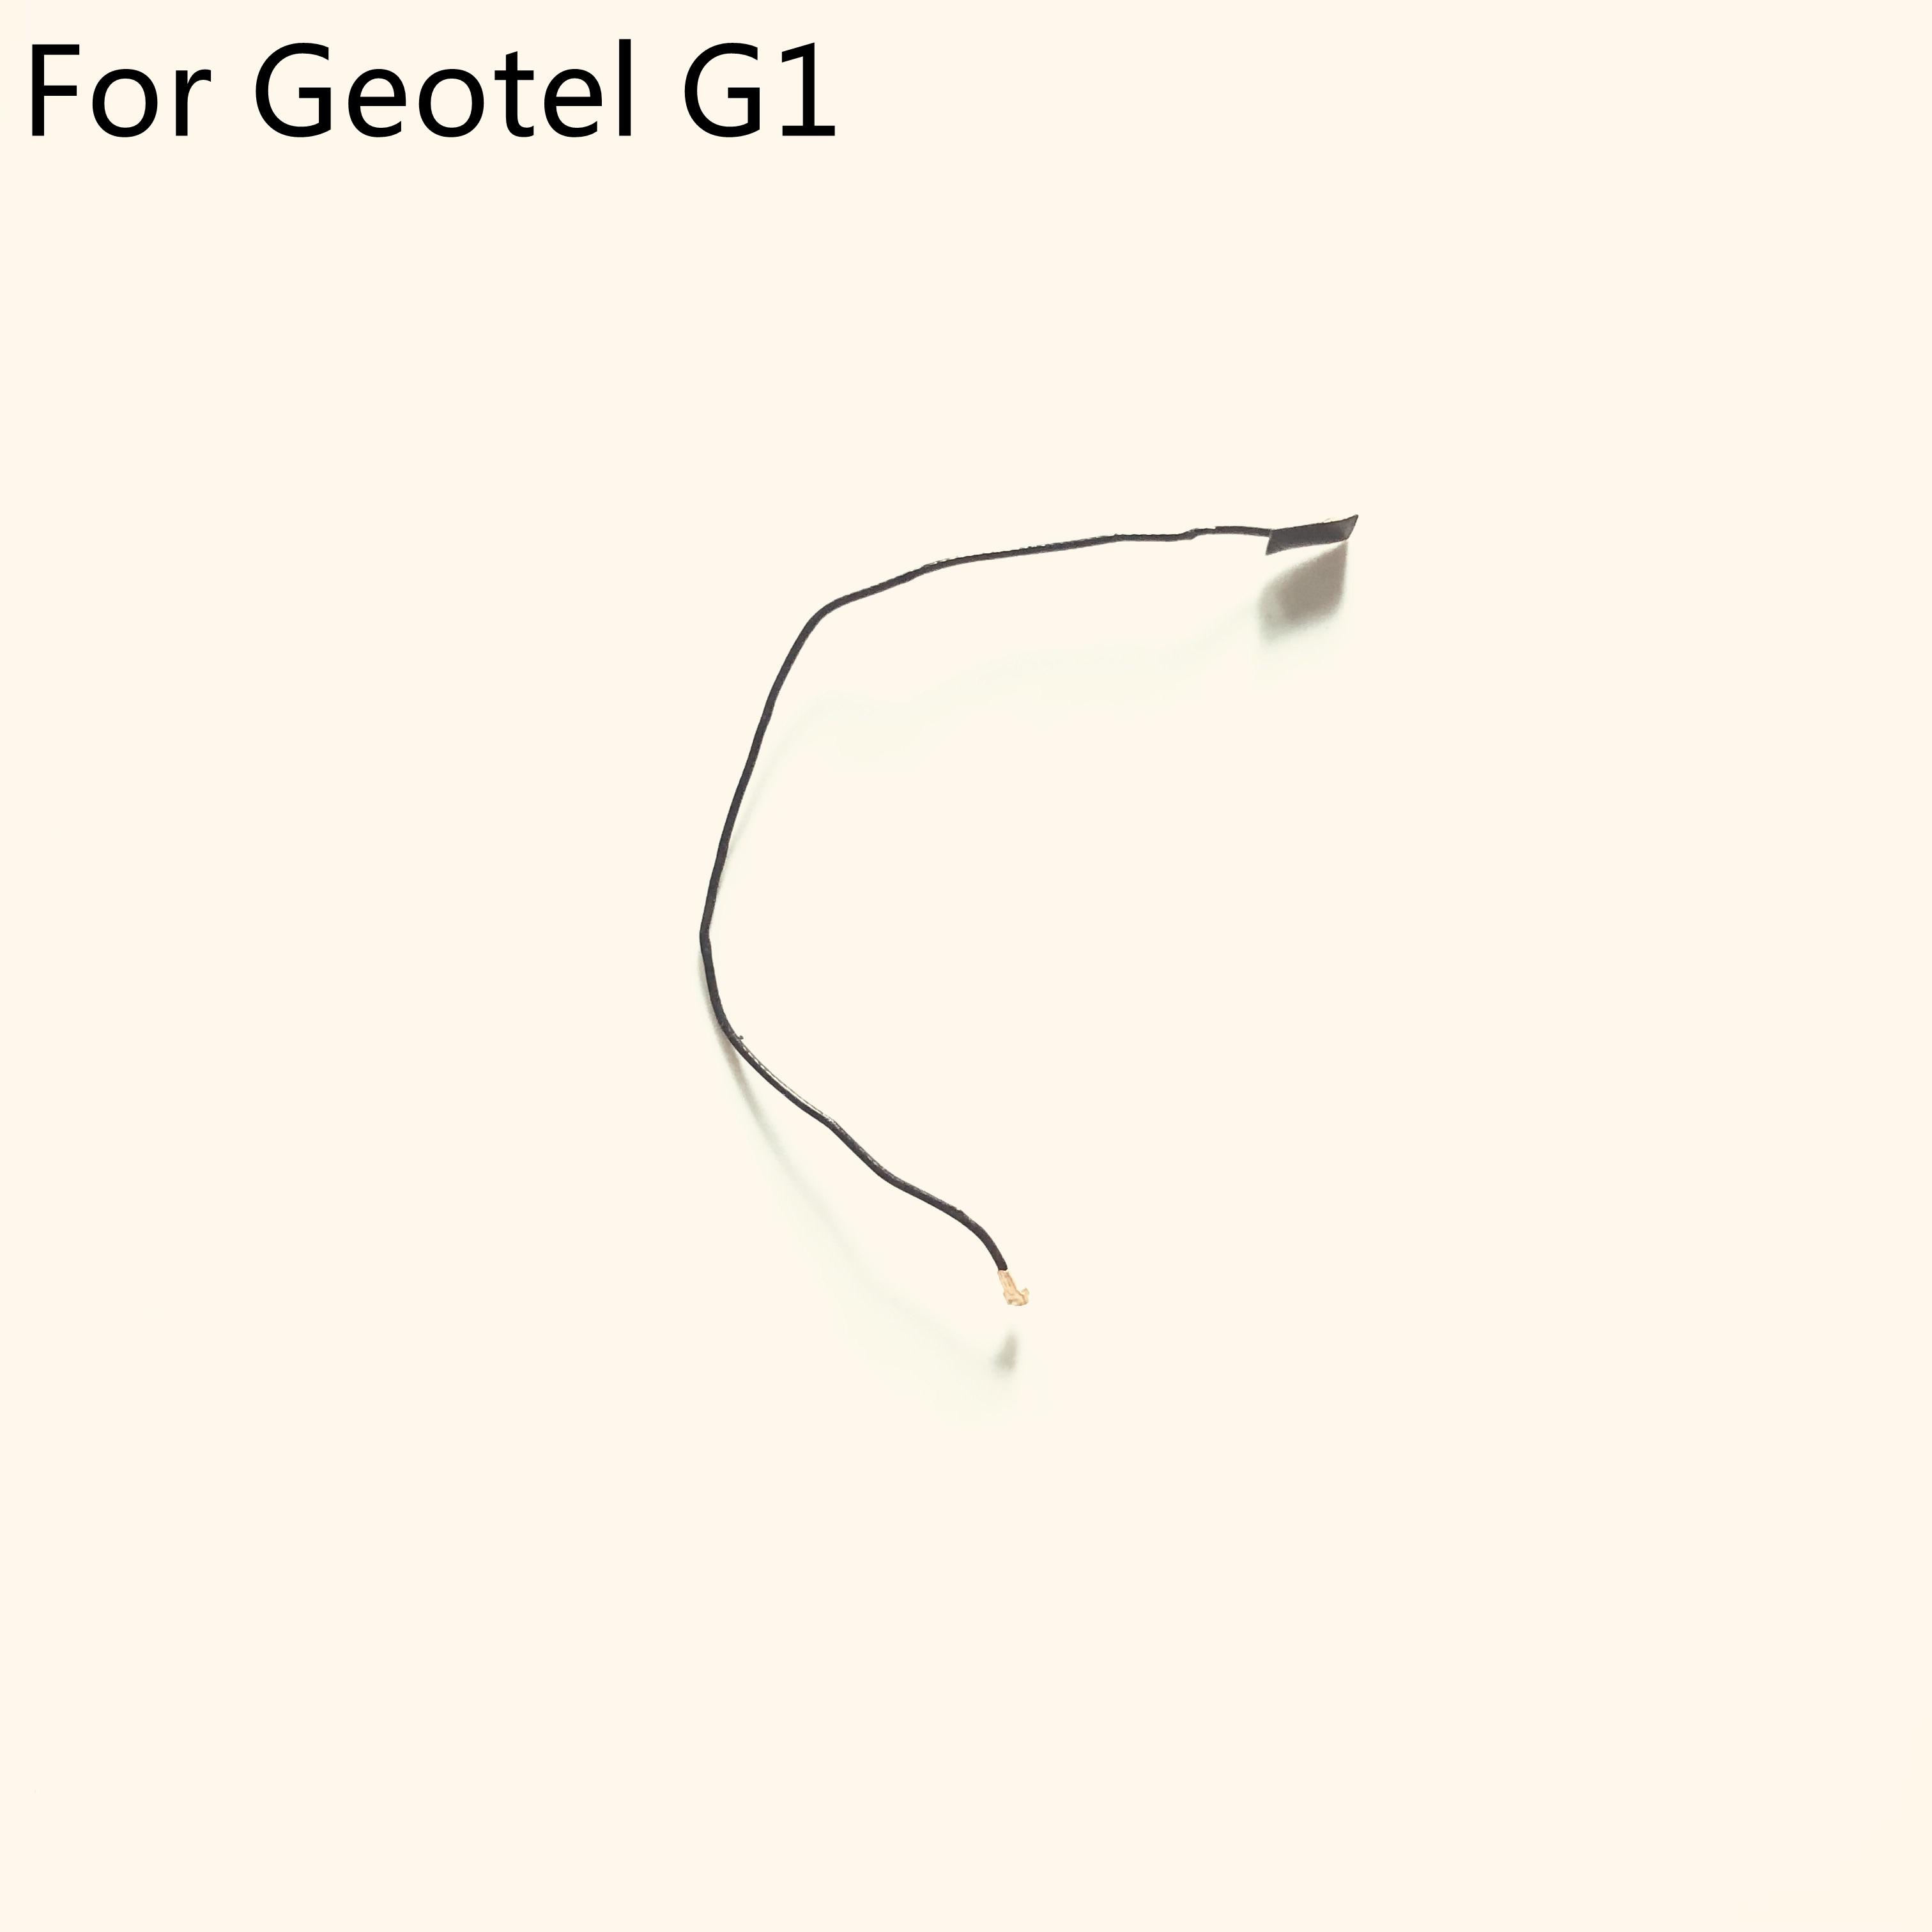 Изображение товара: Geotel G1 Used Phone Coaxial Signal Cable For Geotel G1 MTK6580A Quad Core 5.0